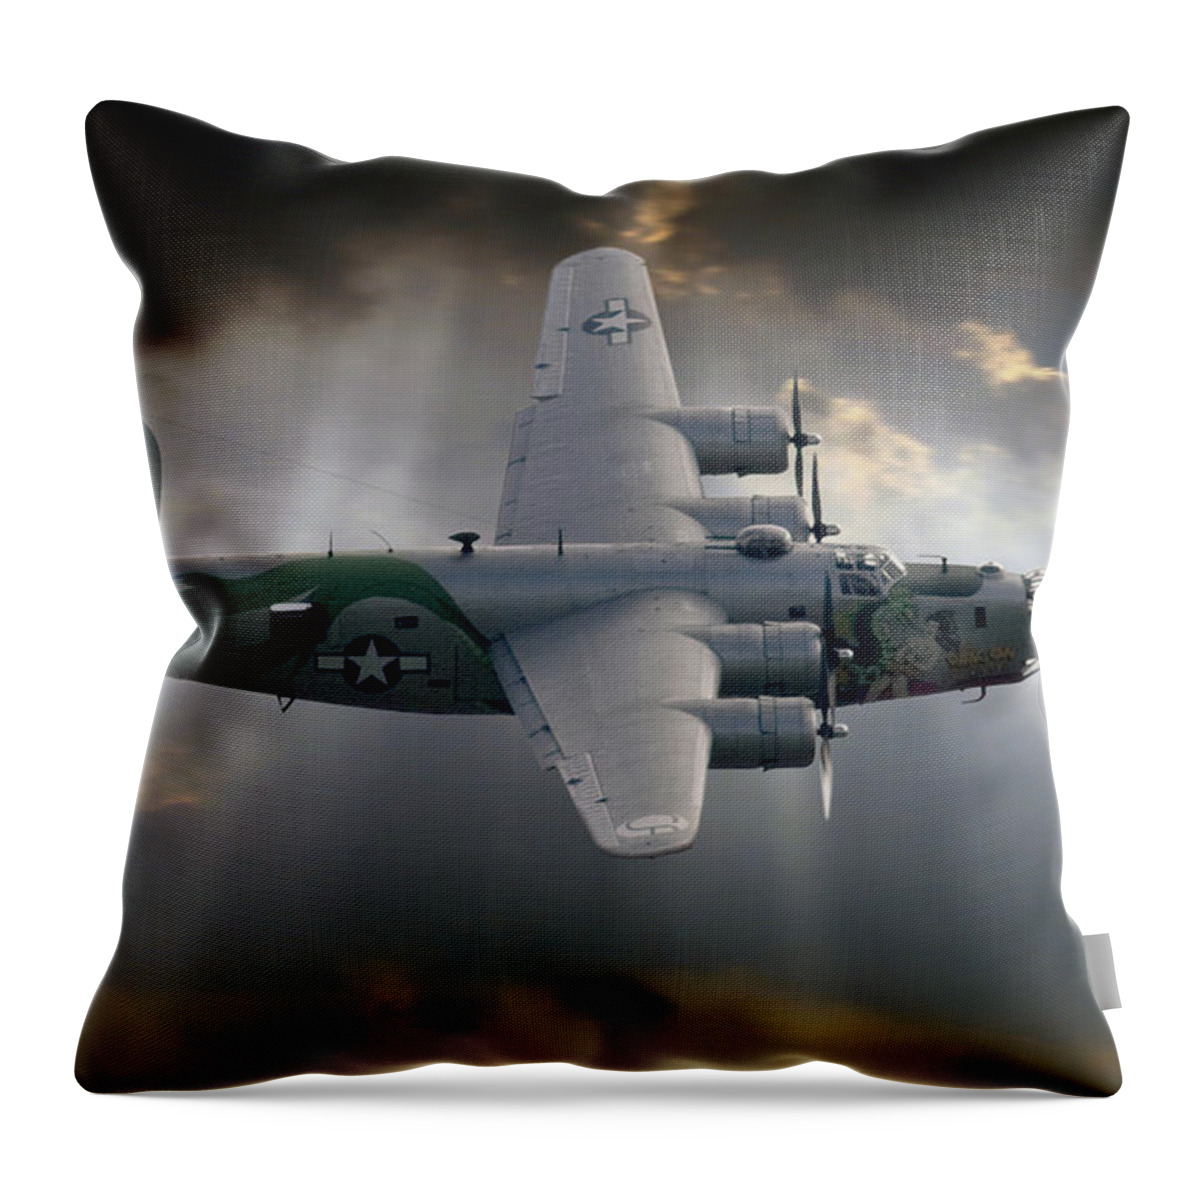  Throw Pillow featuring the photograph The Liberator by Craig Purdie